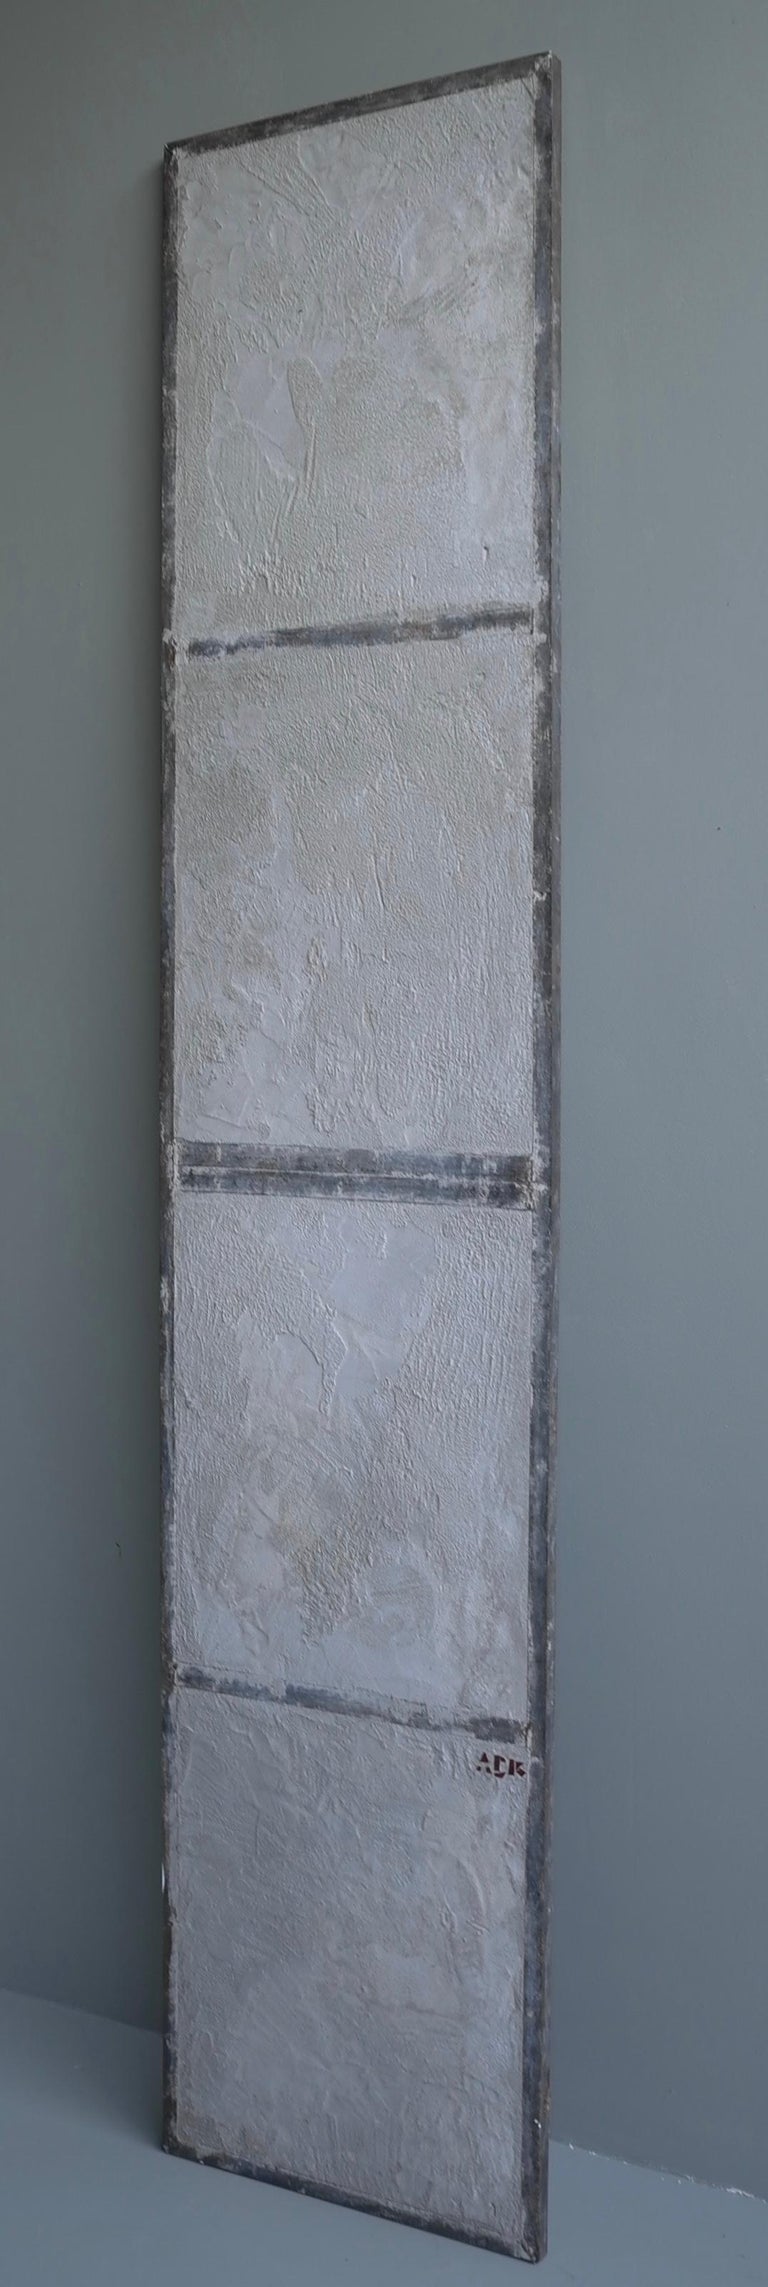 Large Wall-Mounted Sculpture Colored Stone in Concrete Mid-Century Modern, 1952 For Sale 7